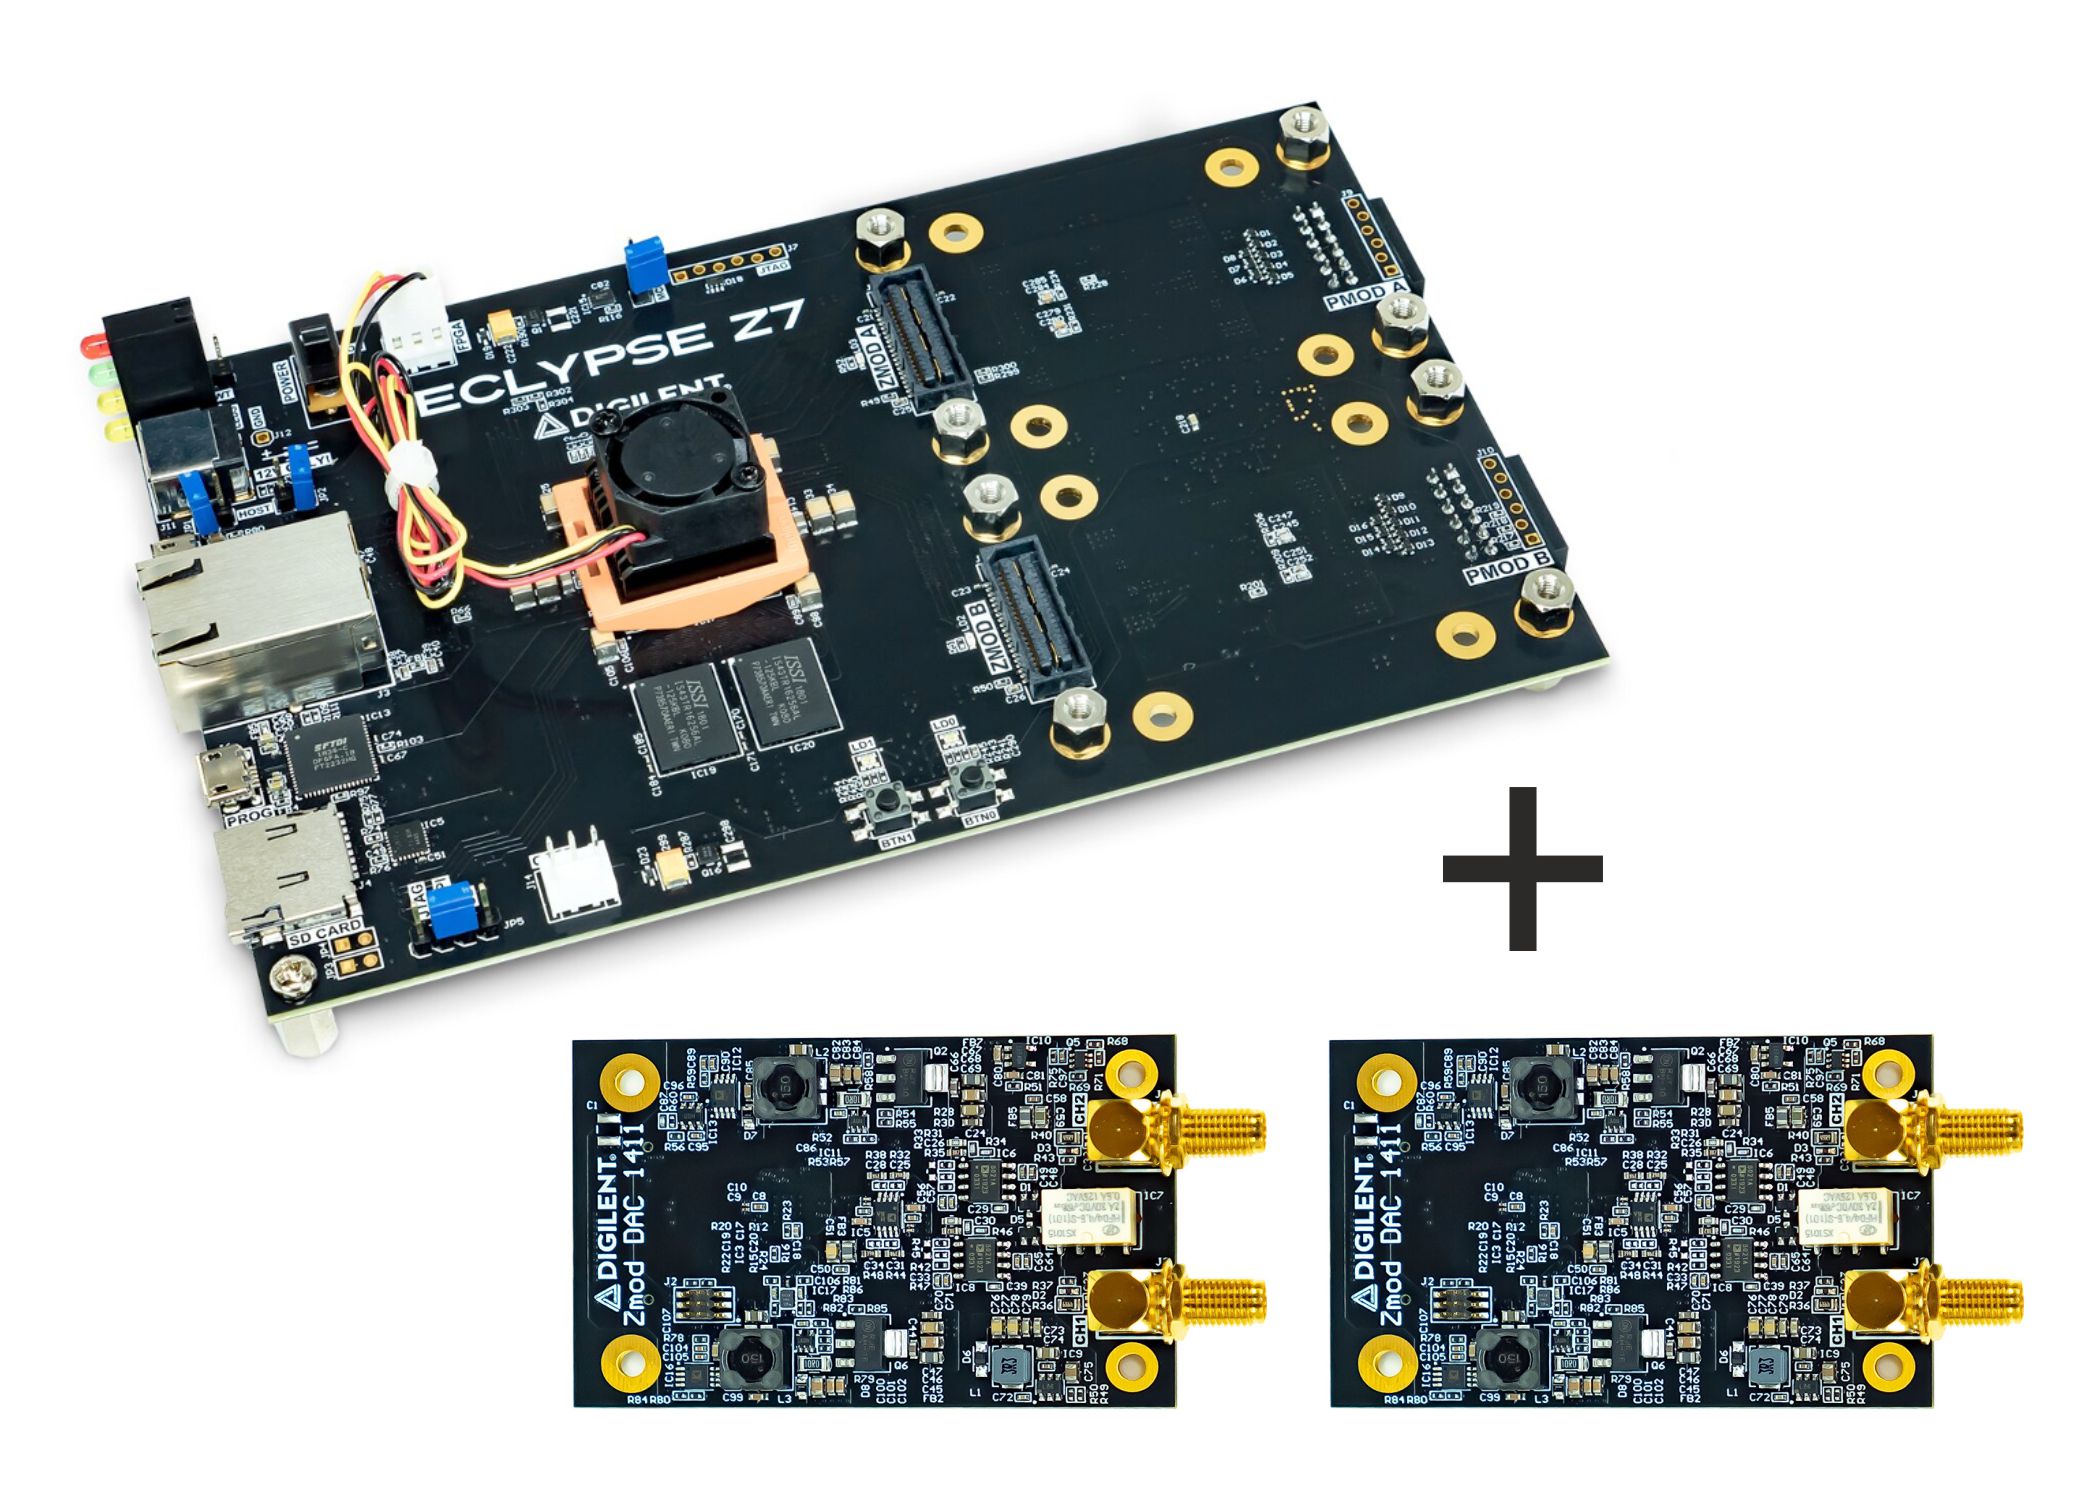 Digilent S Newest Fpga Soc With Syzygy Interface Connectors Featuring Xilinx S Zynq 7000 Psoc Plus Two Dac Zmods Trenz Electronic Gmbh Online Shop En